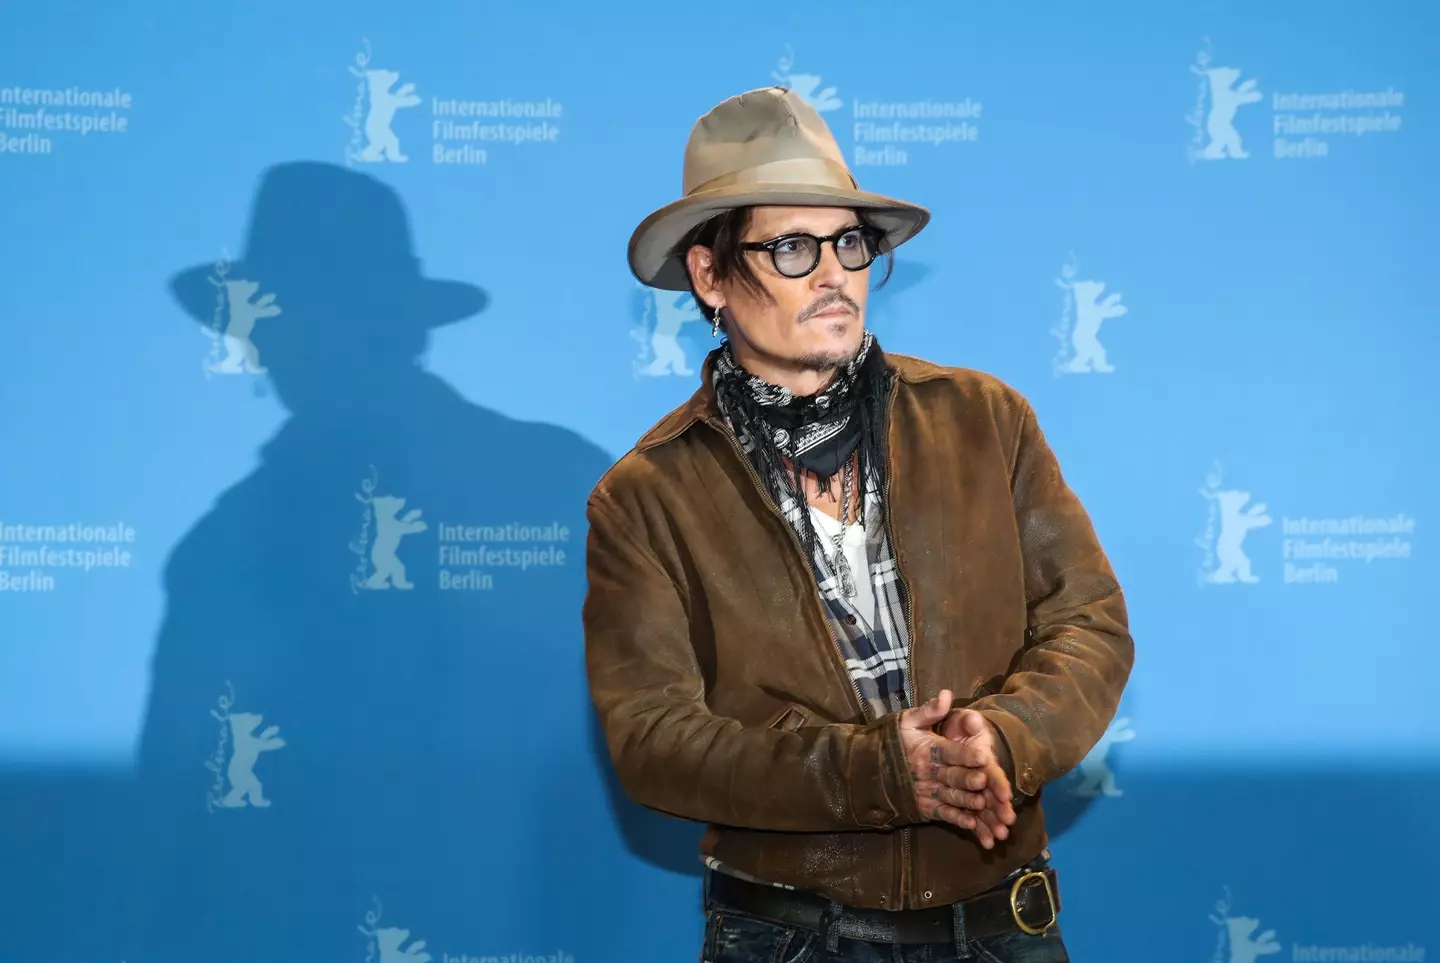 Depp says that he can be himself living in Somerset.